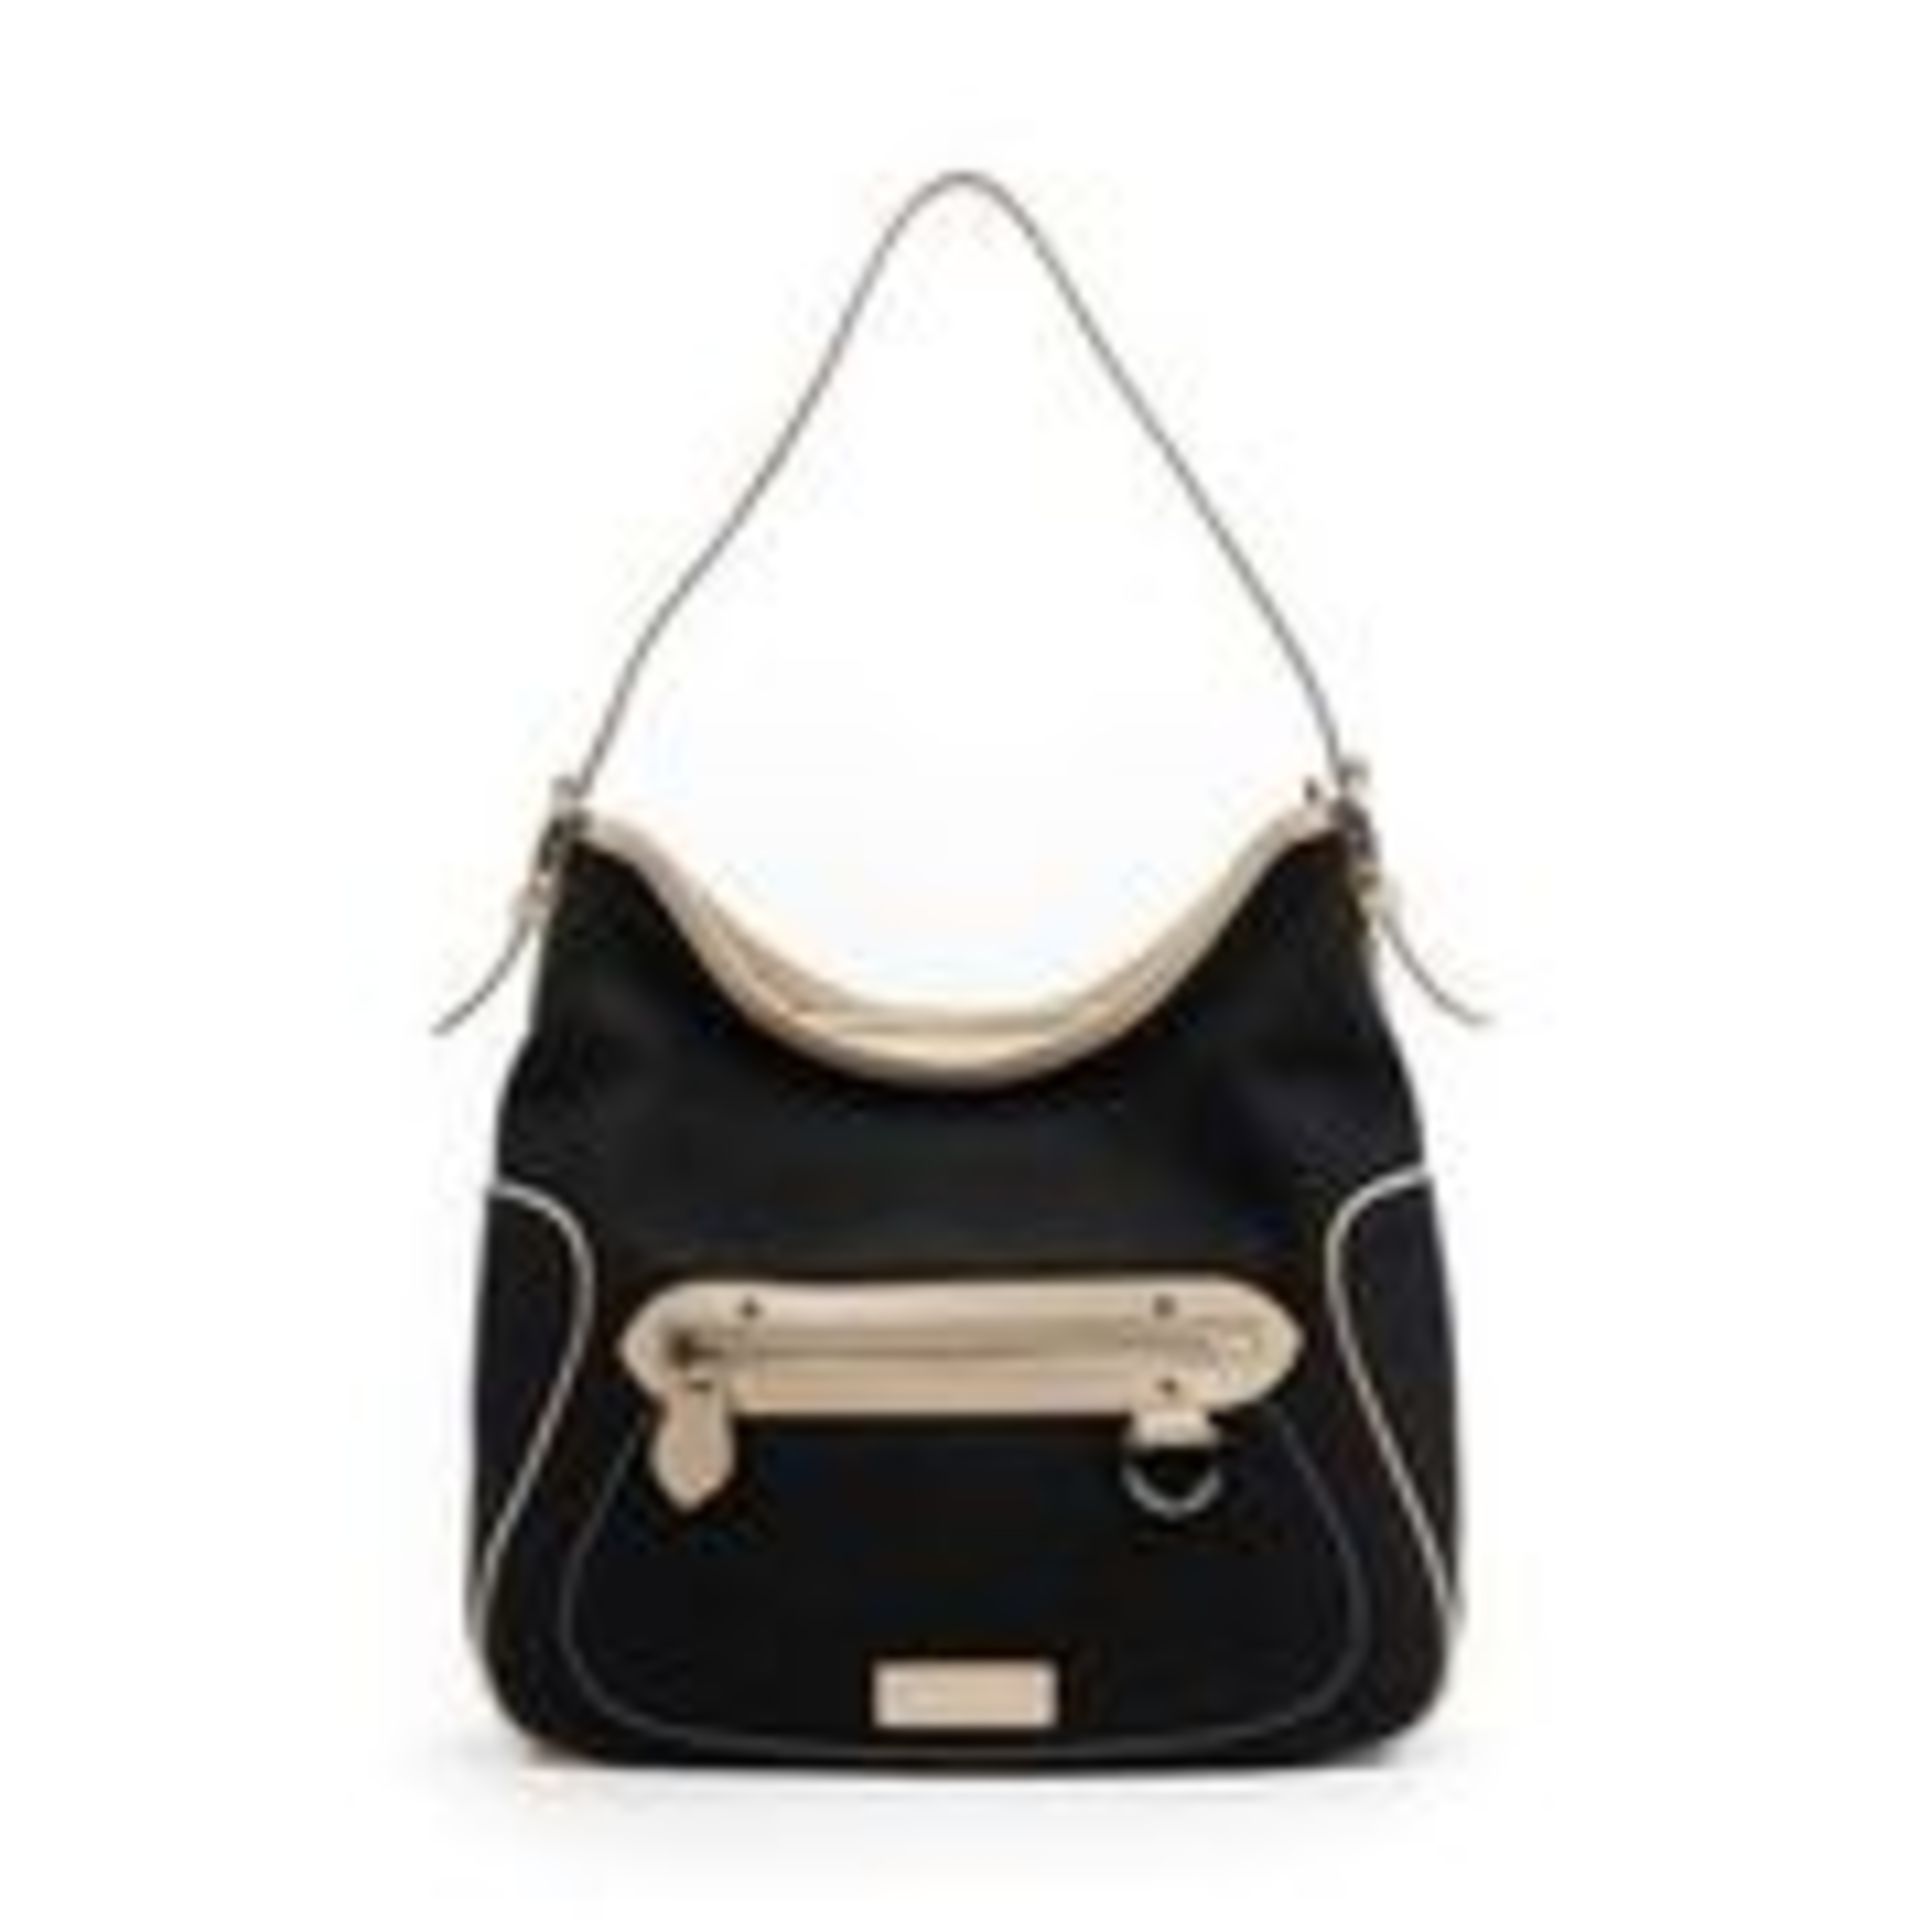 RRP £1,250 Burberry Hobo Shoulder Bag Black/Ivory - AAR1126 - Grade A - Please Contact Us Directly - Image 2 of 3